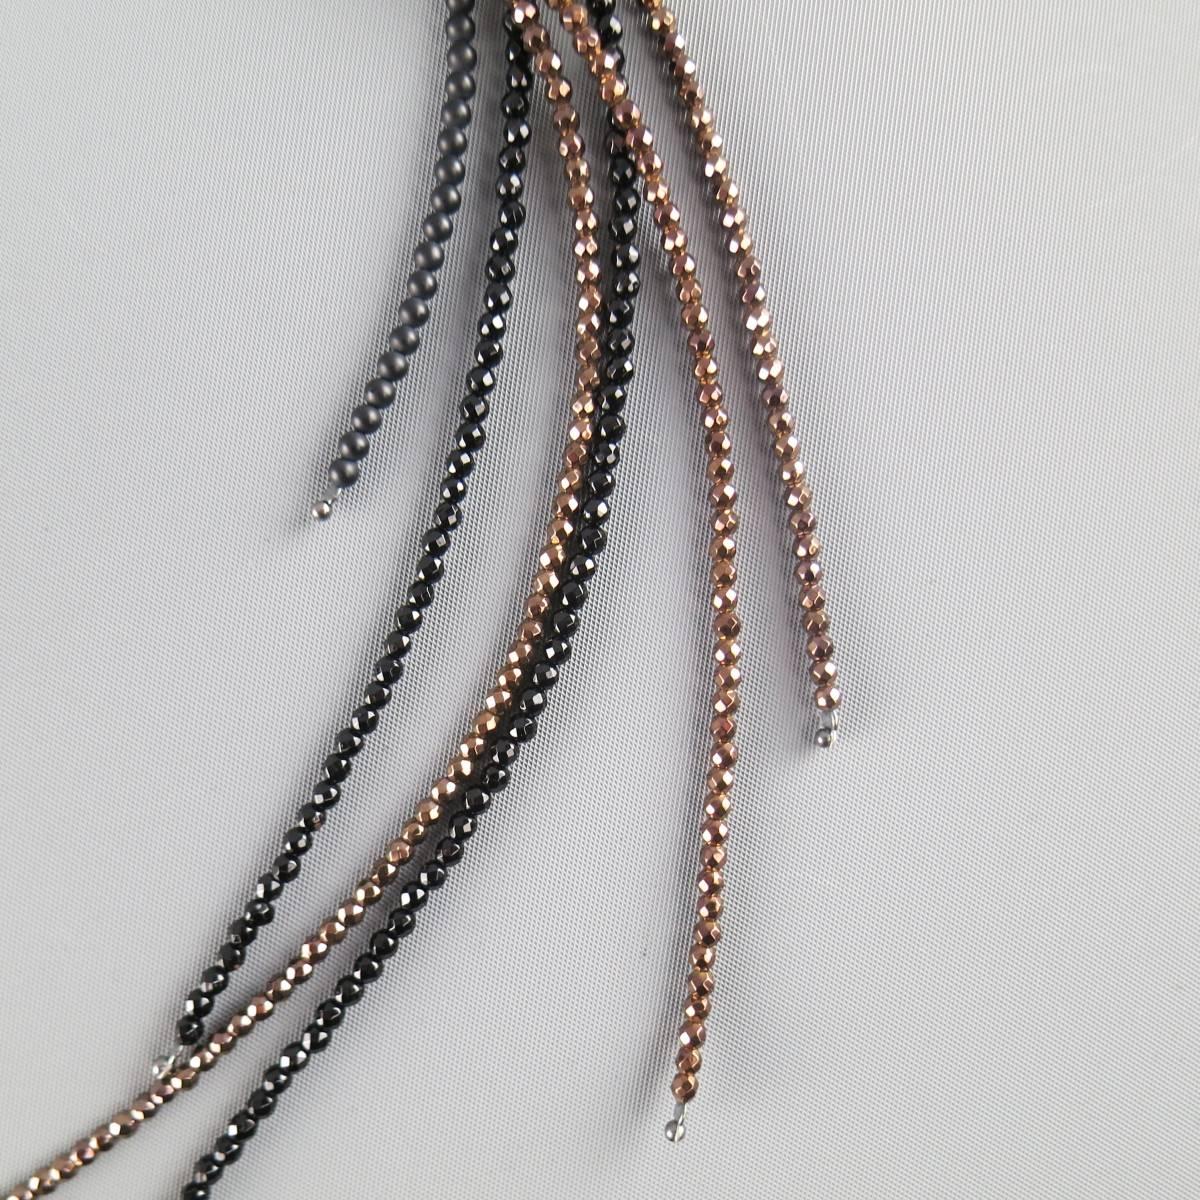 BRUNELLO CUCINELLI comes in  black and bronze metallic and matte beaded strands and features a looped side with dark sterling silver closure and long fringe that is worn through the loop. Made in Italy.
 
Excellent Pre-Owned Condition.
Marked: